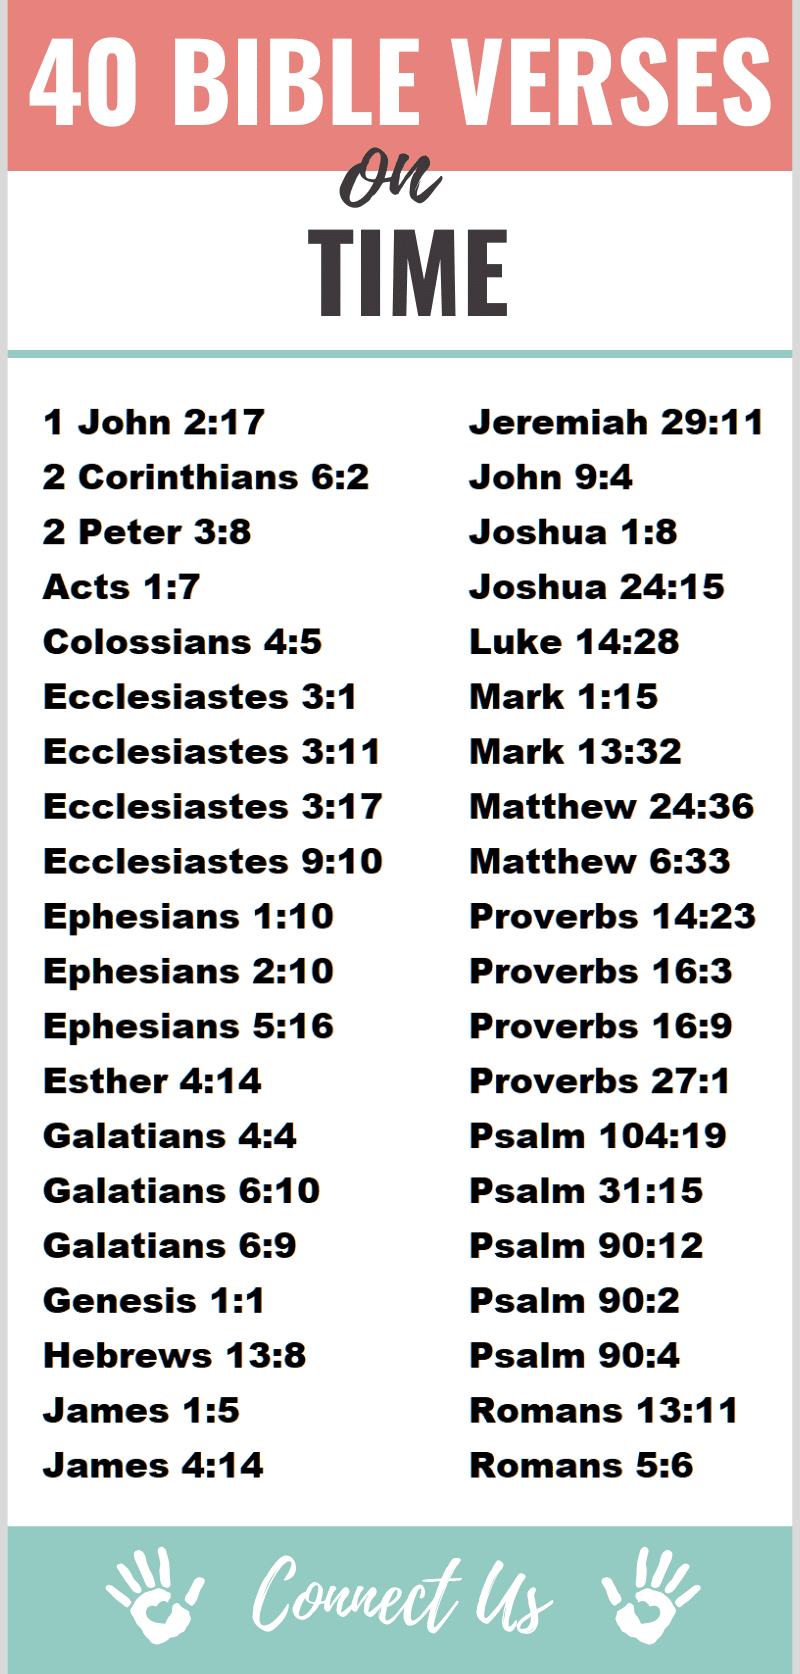 Bible Verses on Time